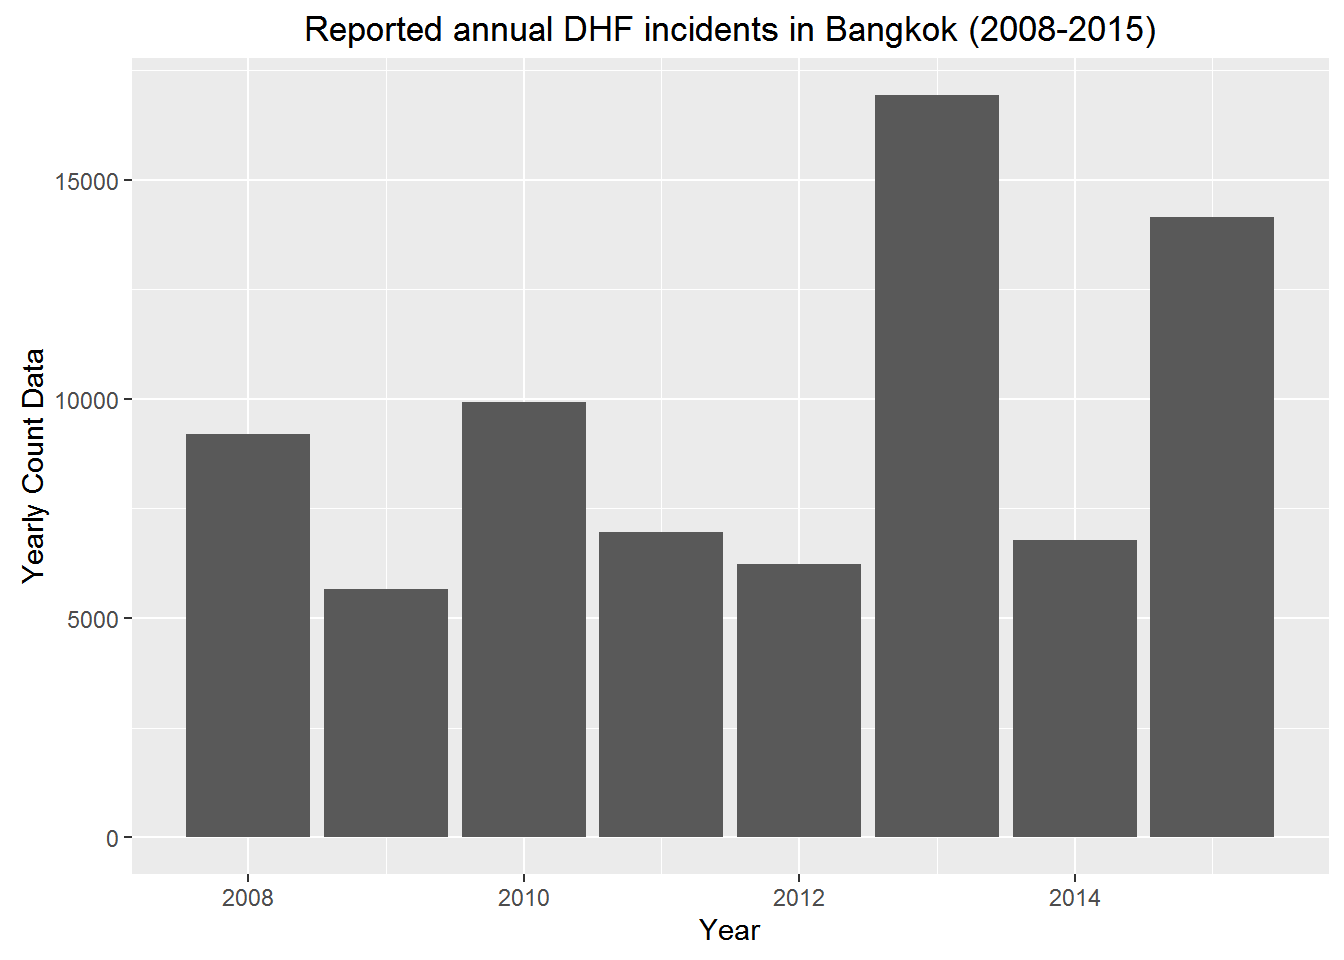 The DHF incidence peaked in 2013 and 2015. It seems that dengue outbreak increases every alternative year.